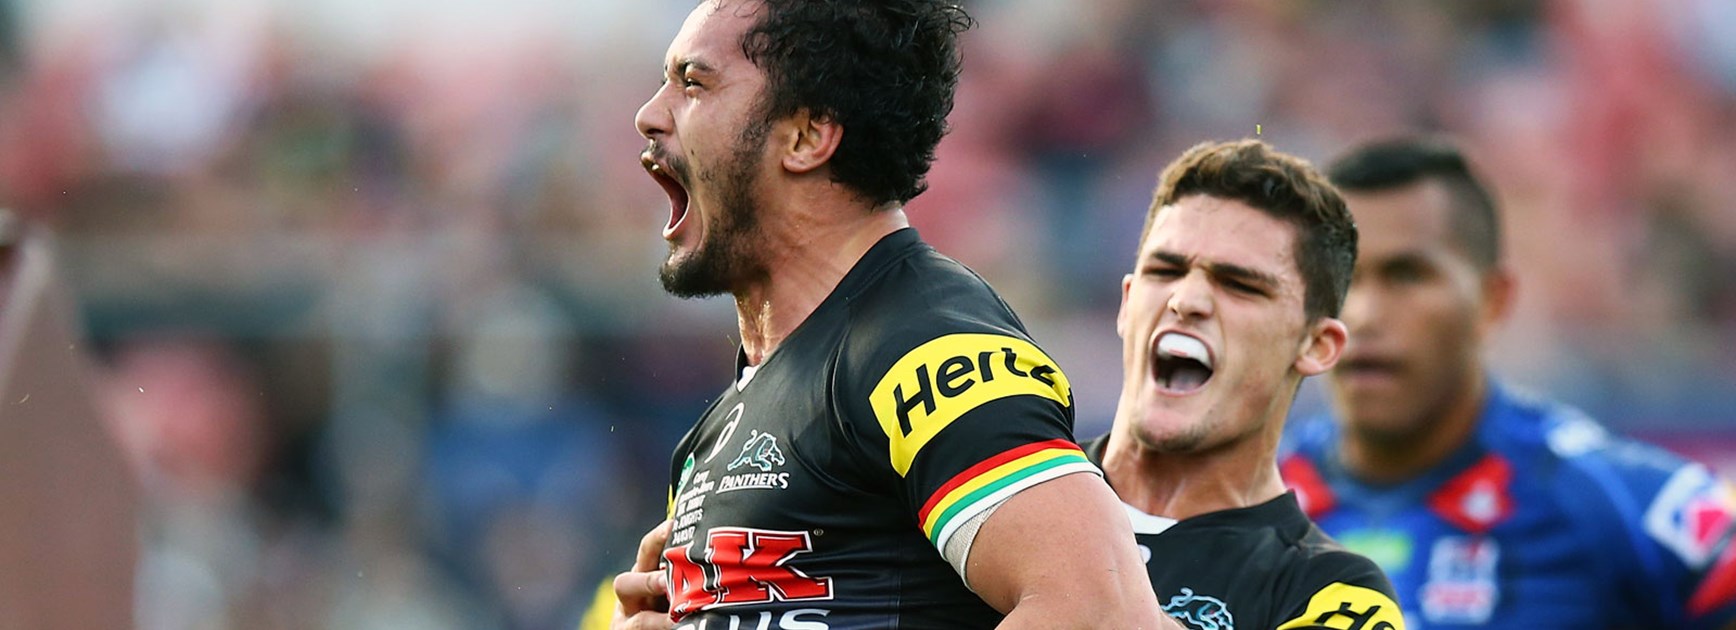 Panthers forward Corey Harawira-Naera scored a try on debut.